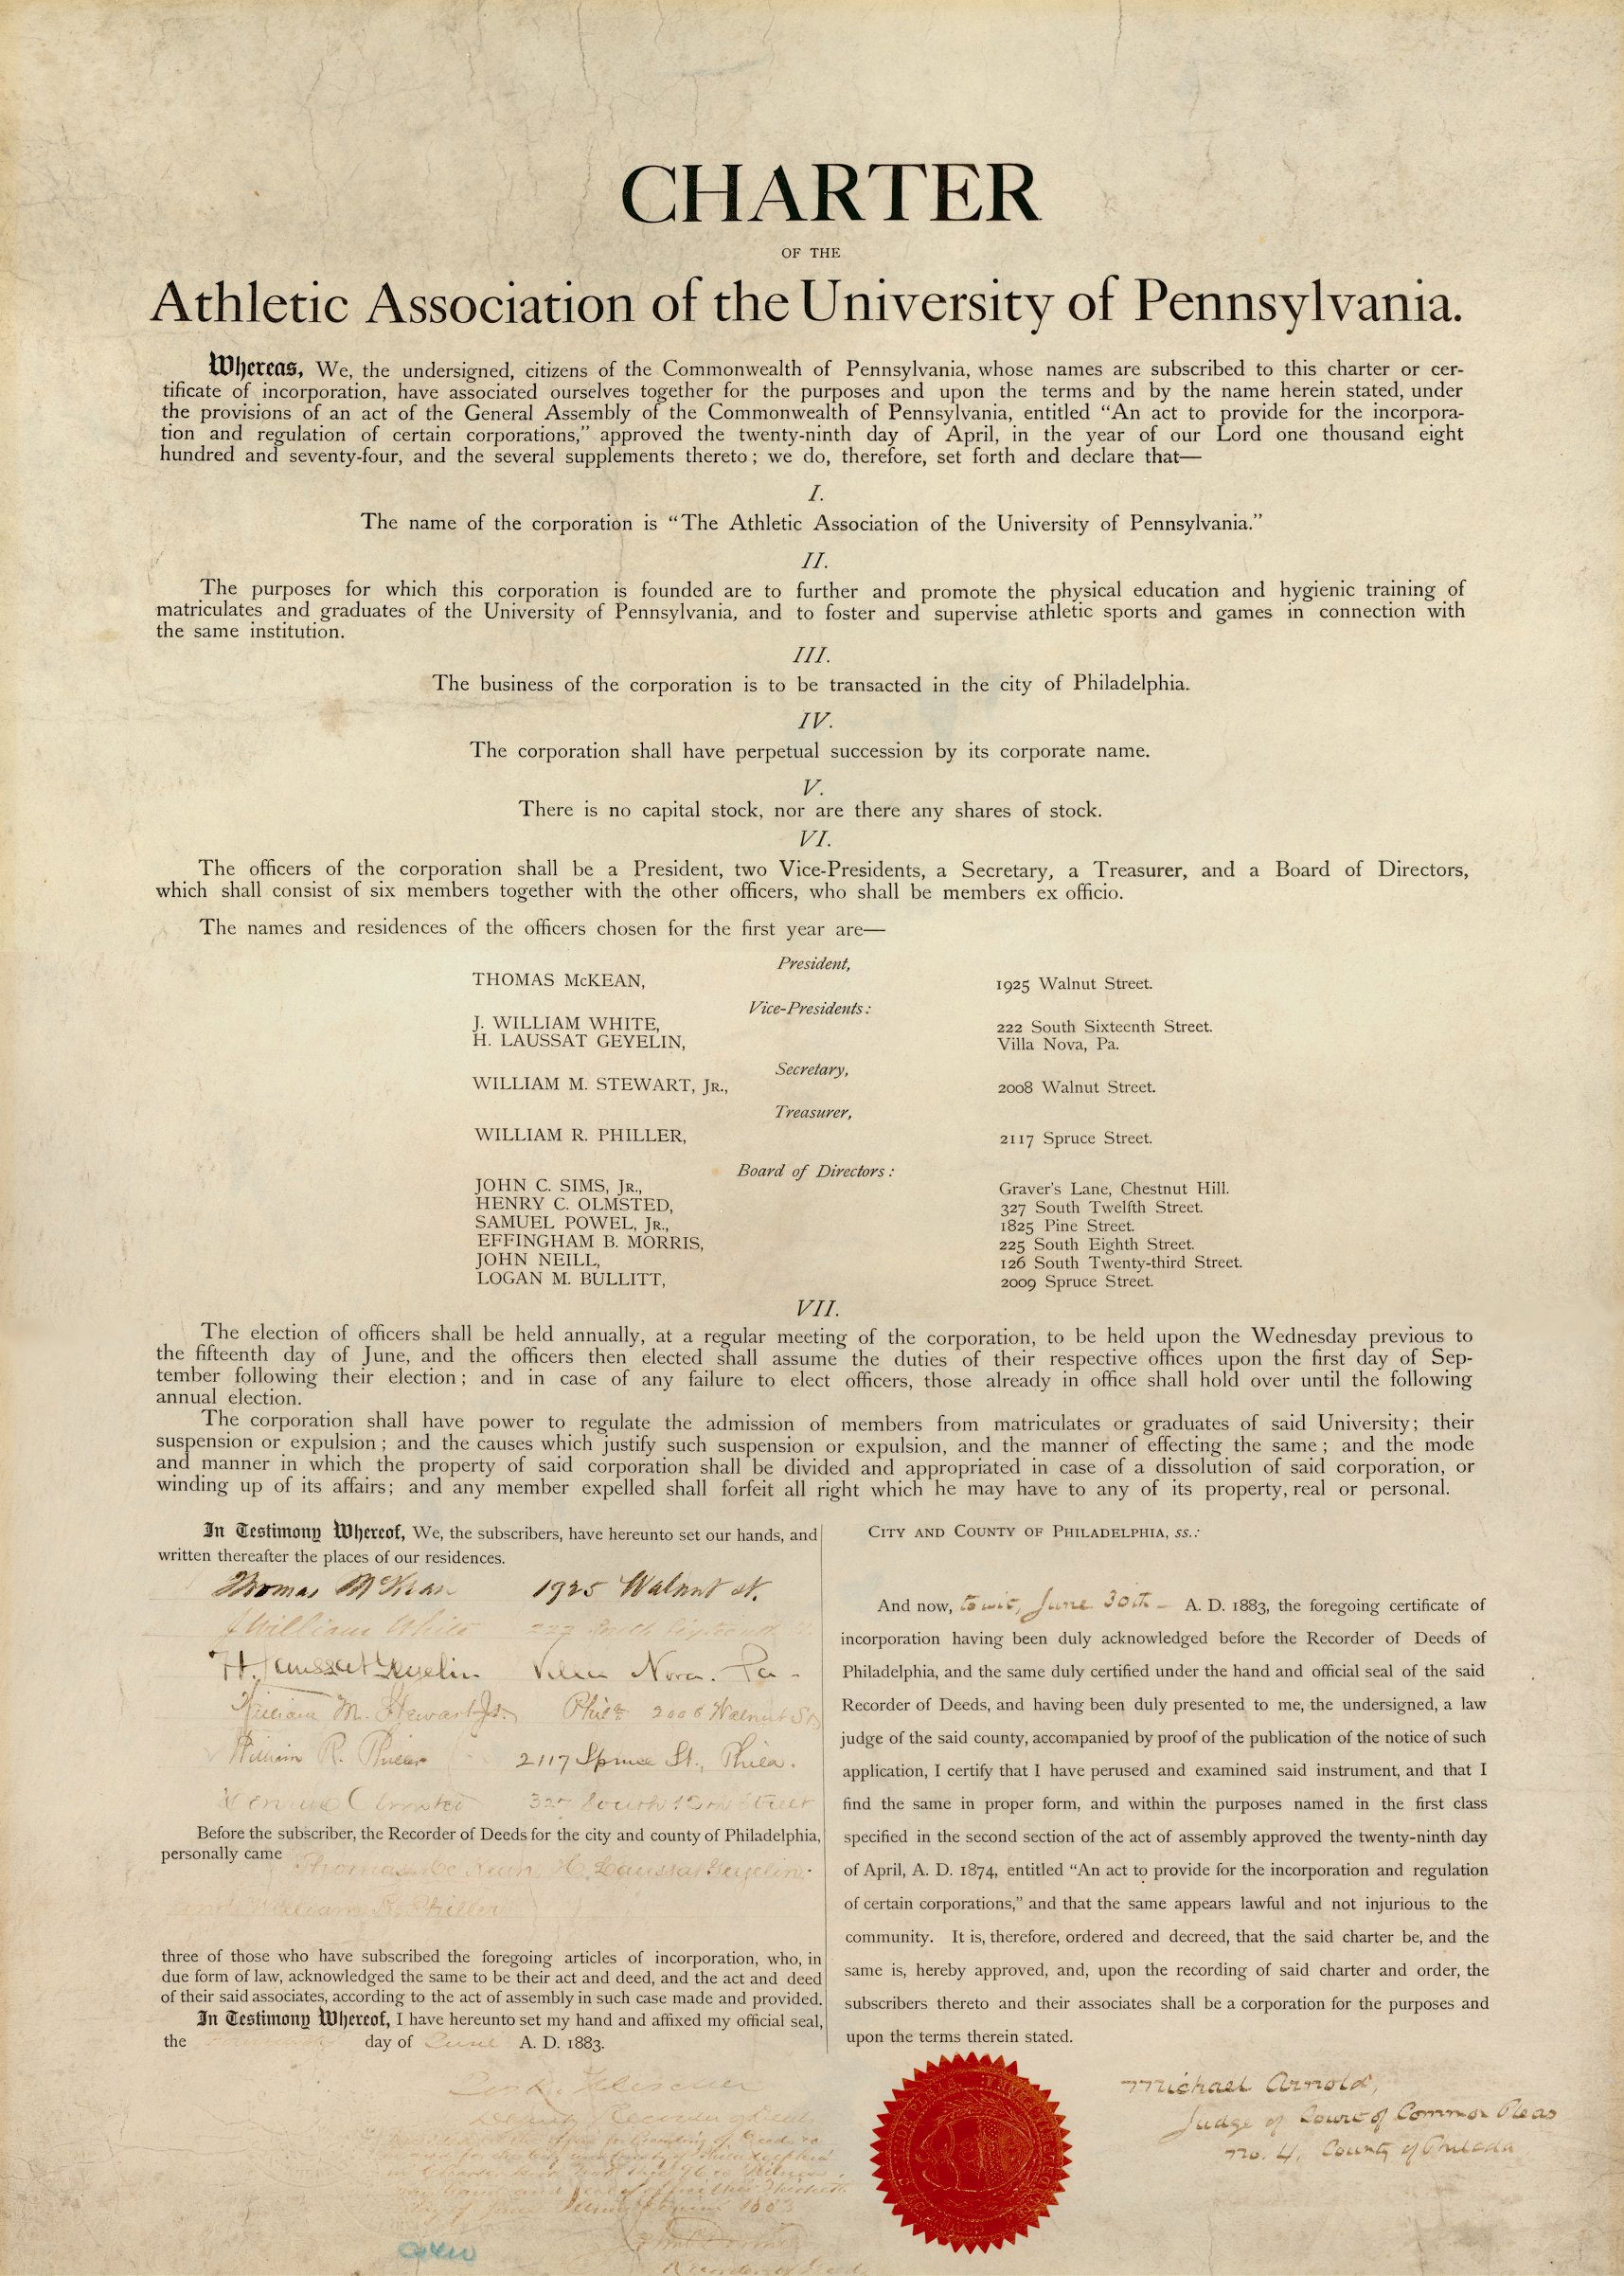 Charter of the Athletic Association of the University of Pennsylvania, 1883